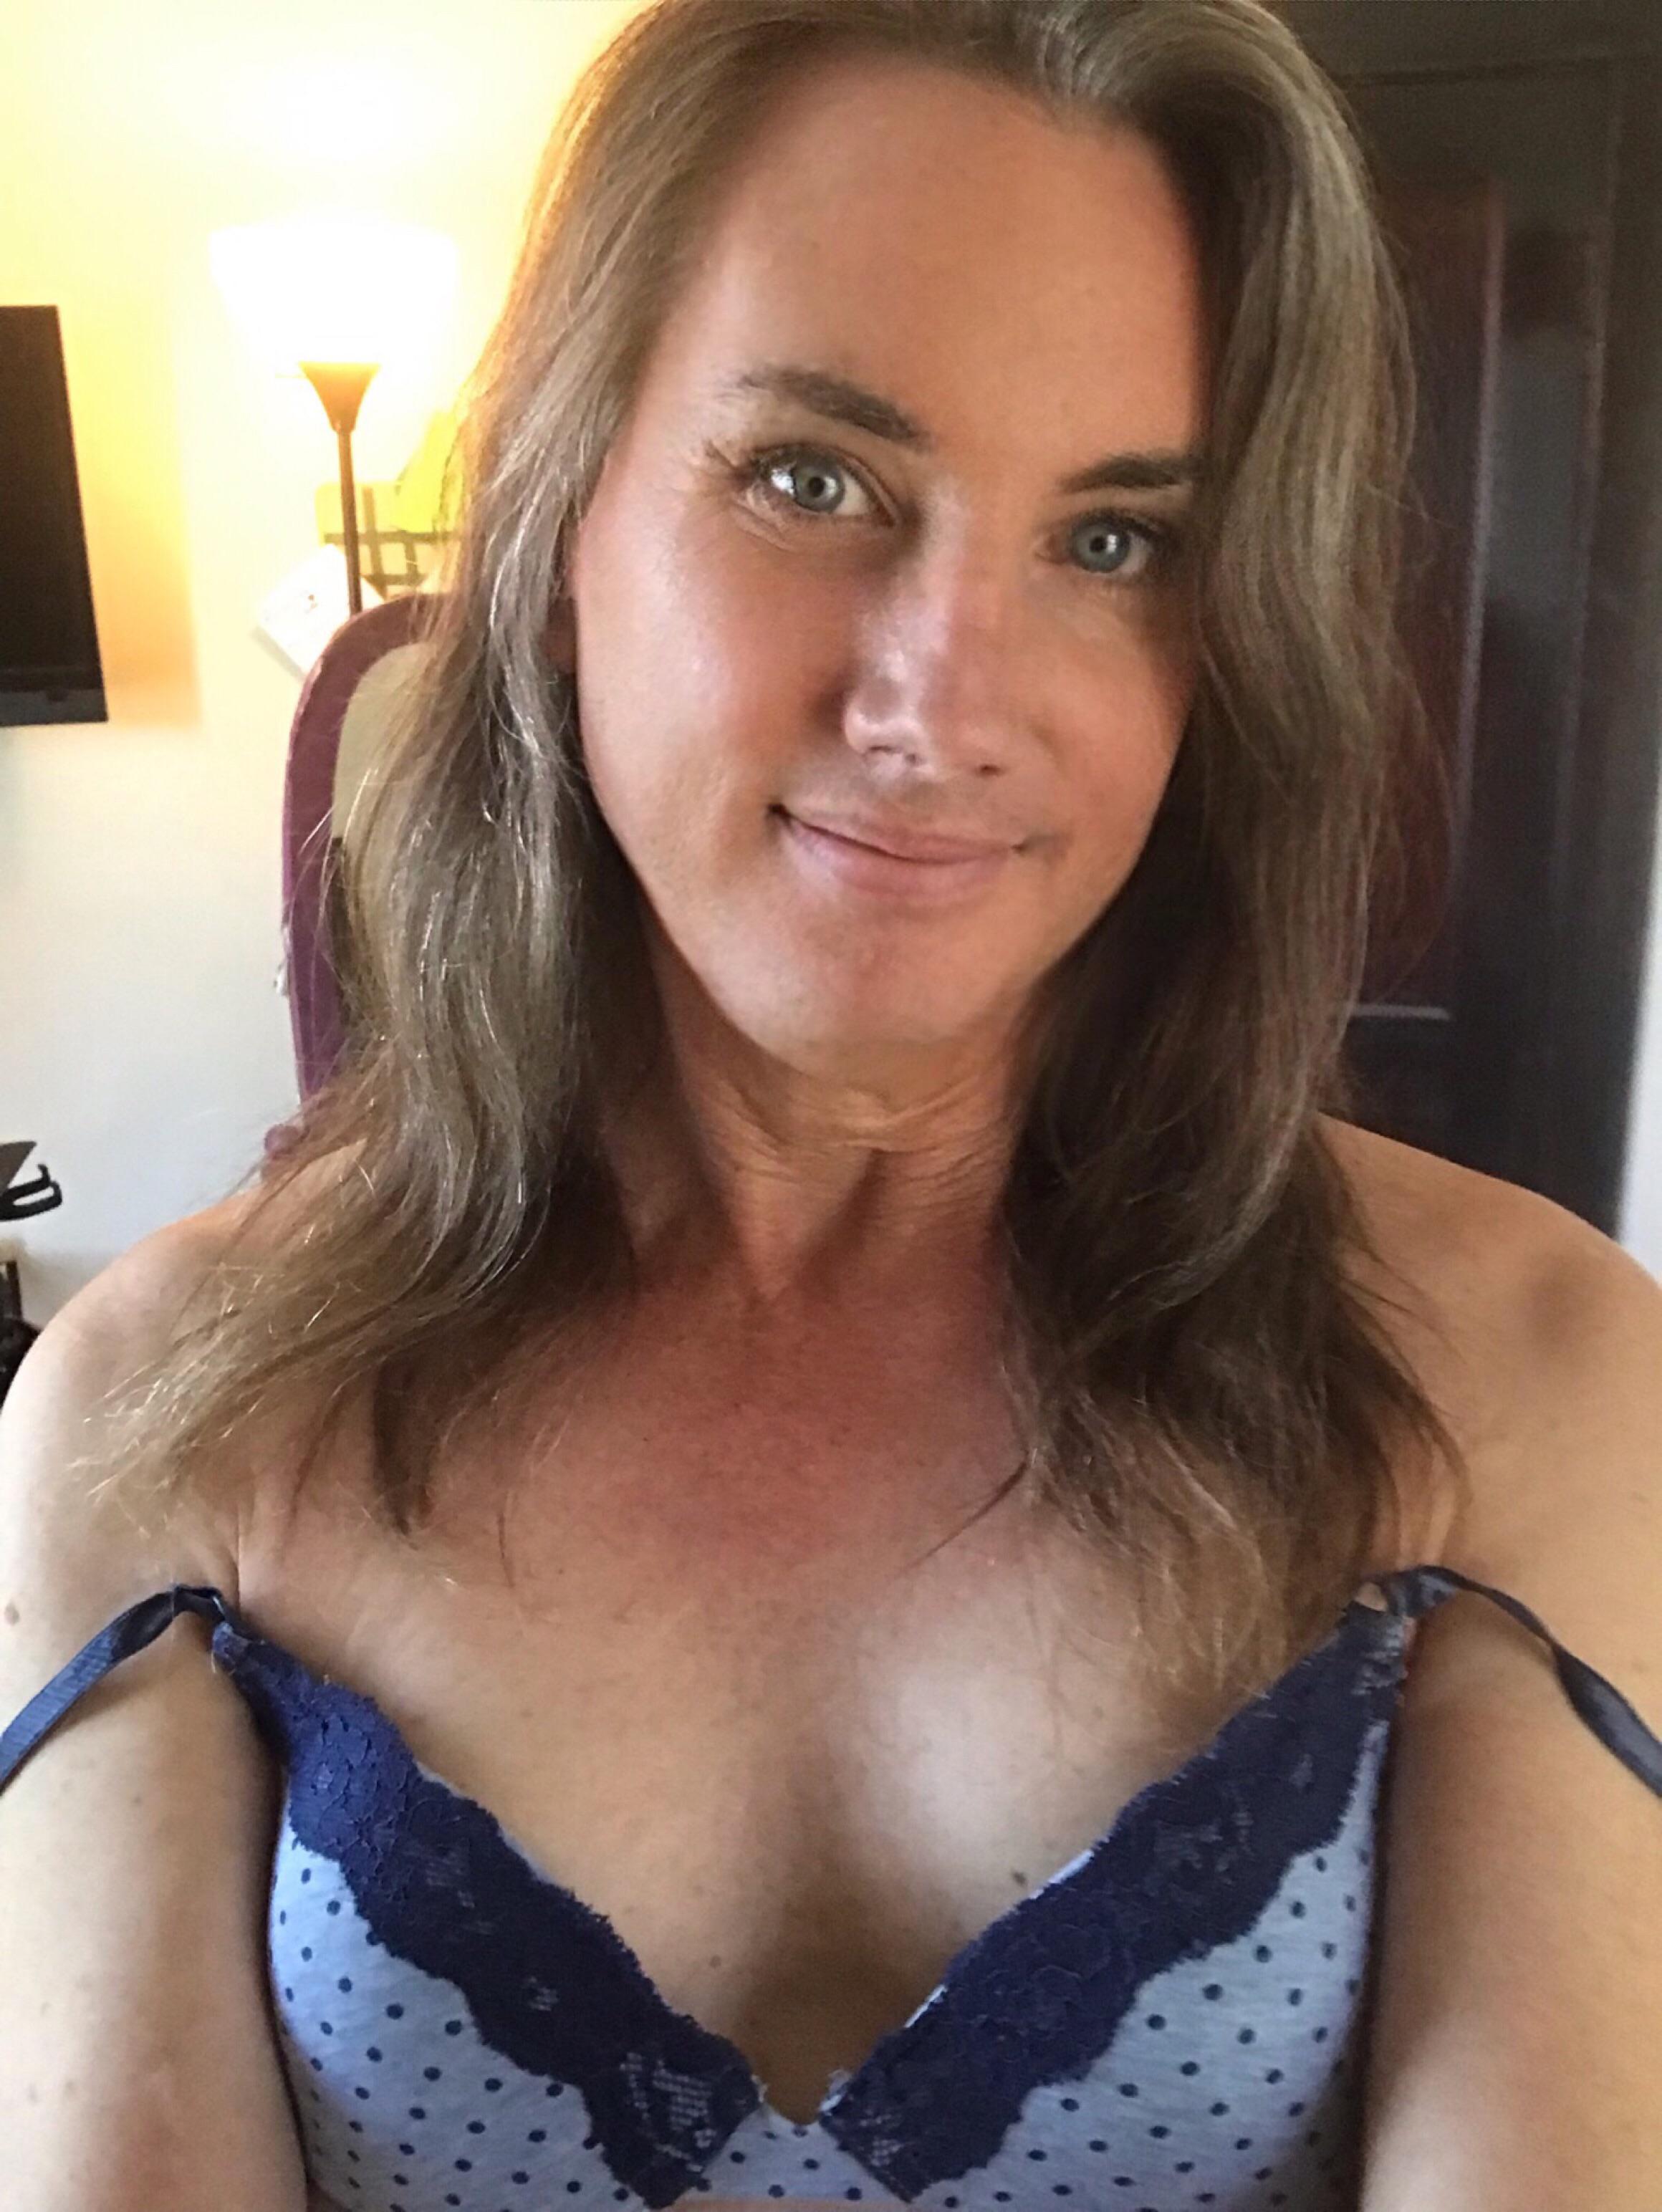 Getting some help from a push-up bra! 62 yo mtf, 9 months HRT